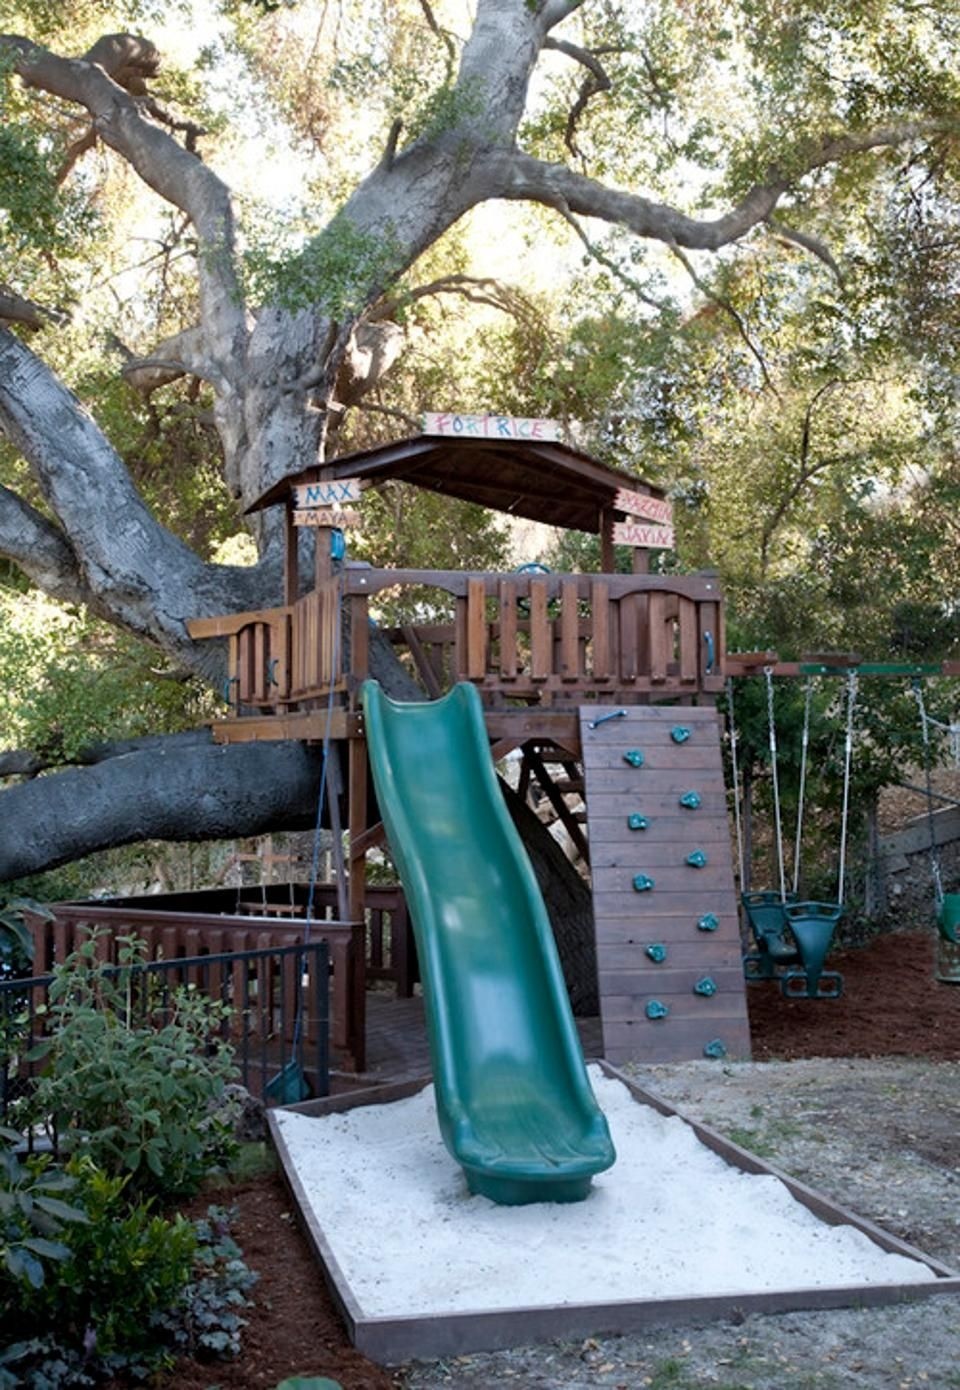 Cool play equipment for your garden that kids will love